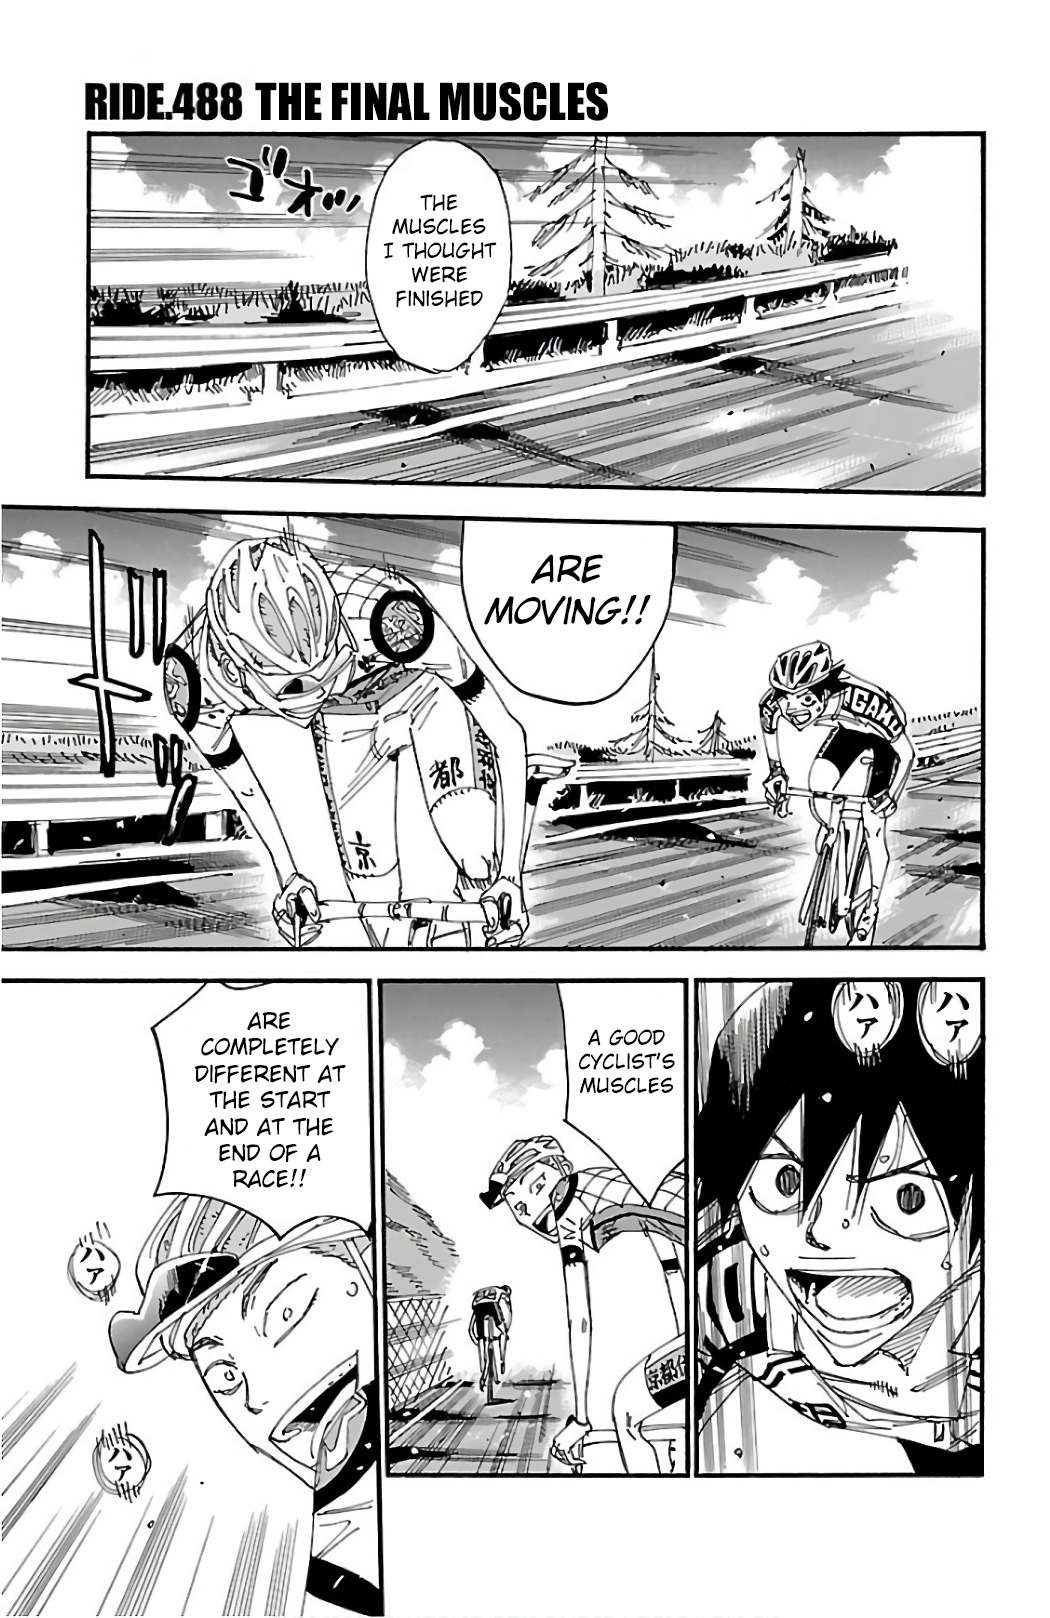 Yowamushi Pedal Vol.57 Chapter 488: The Final Muscles - Picture 1